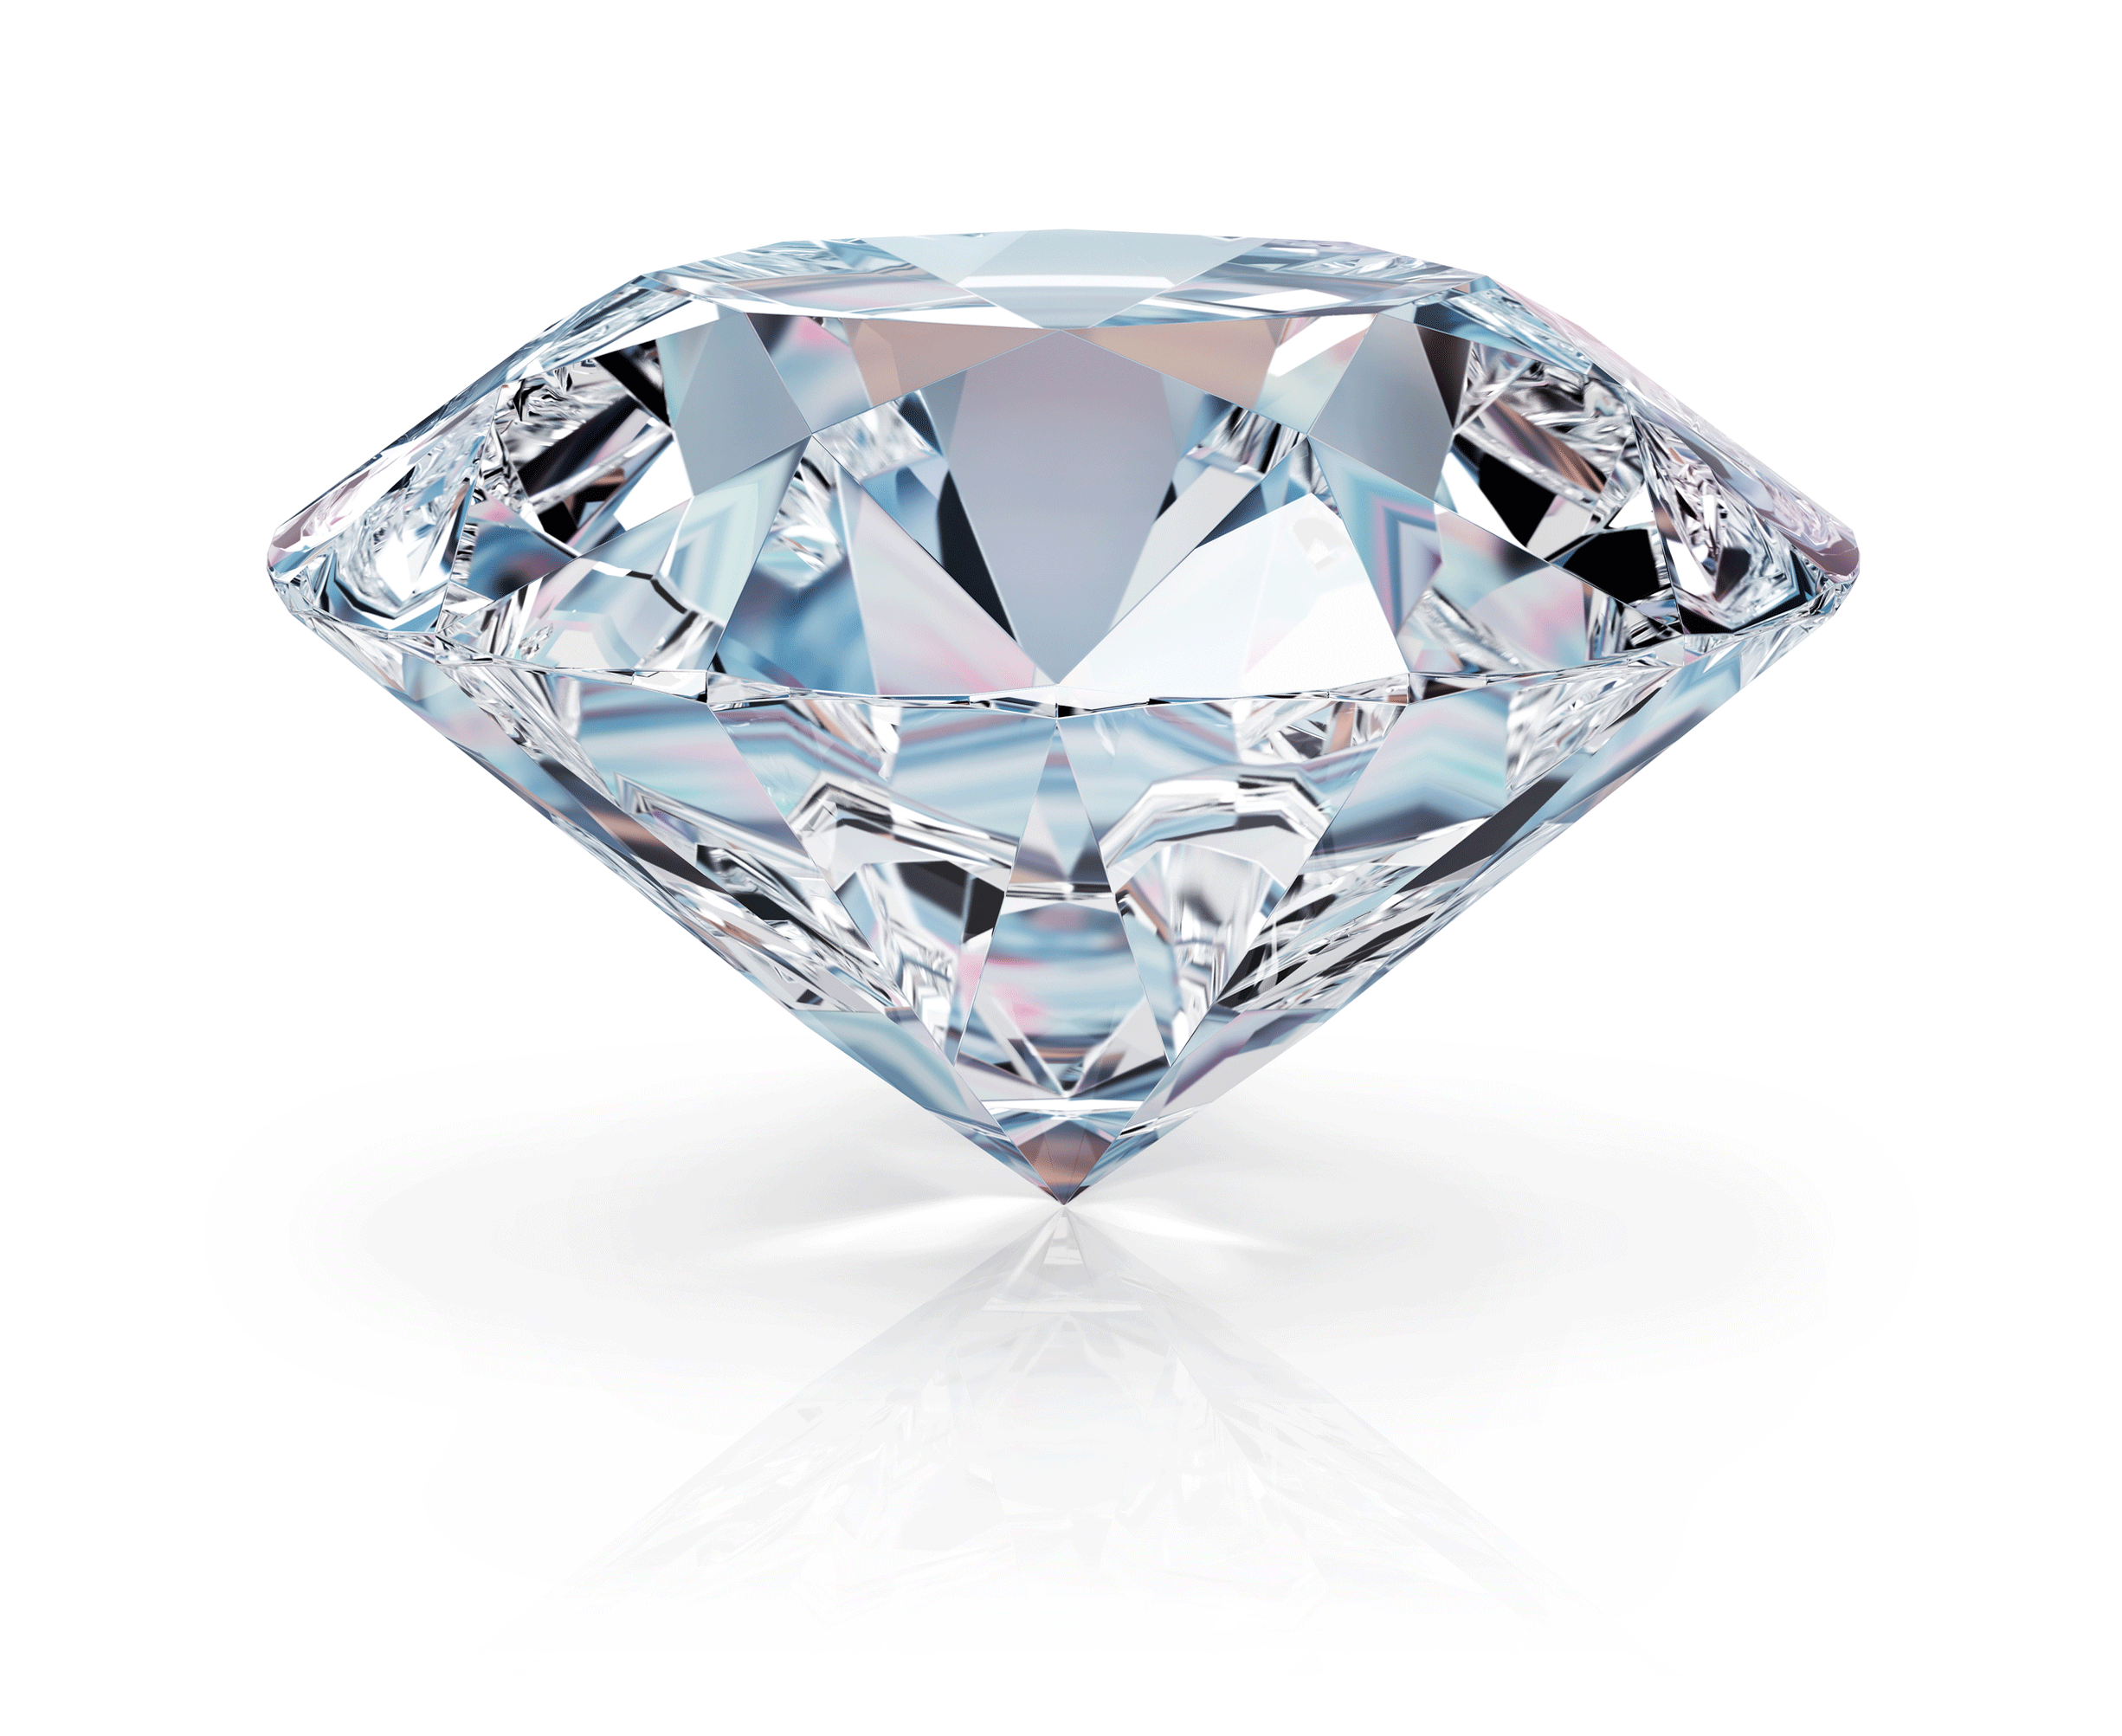 Making the Grade: How to Find the Perfect Diamond